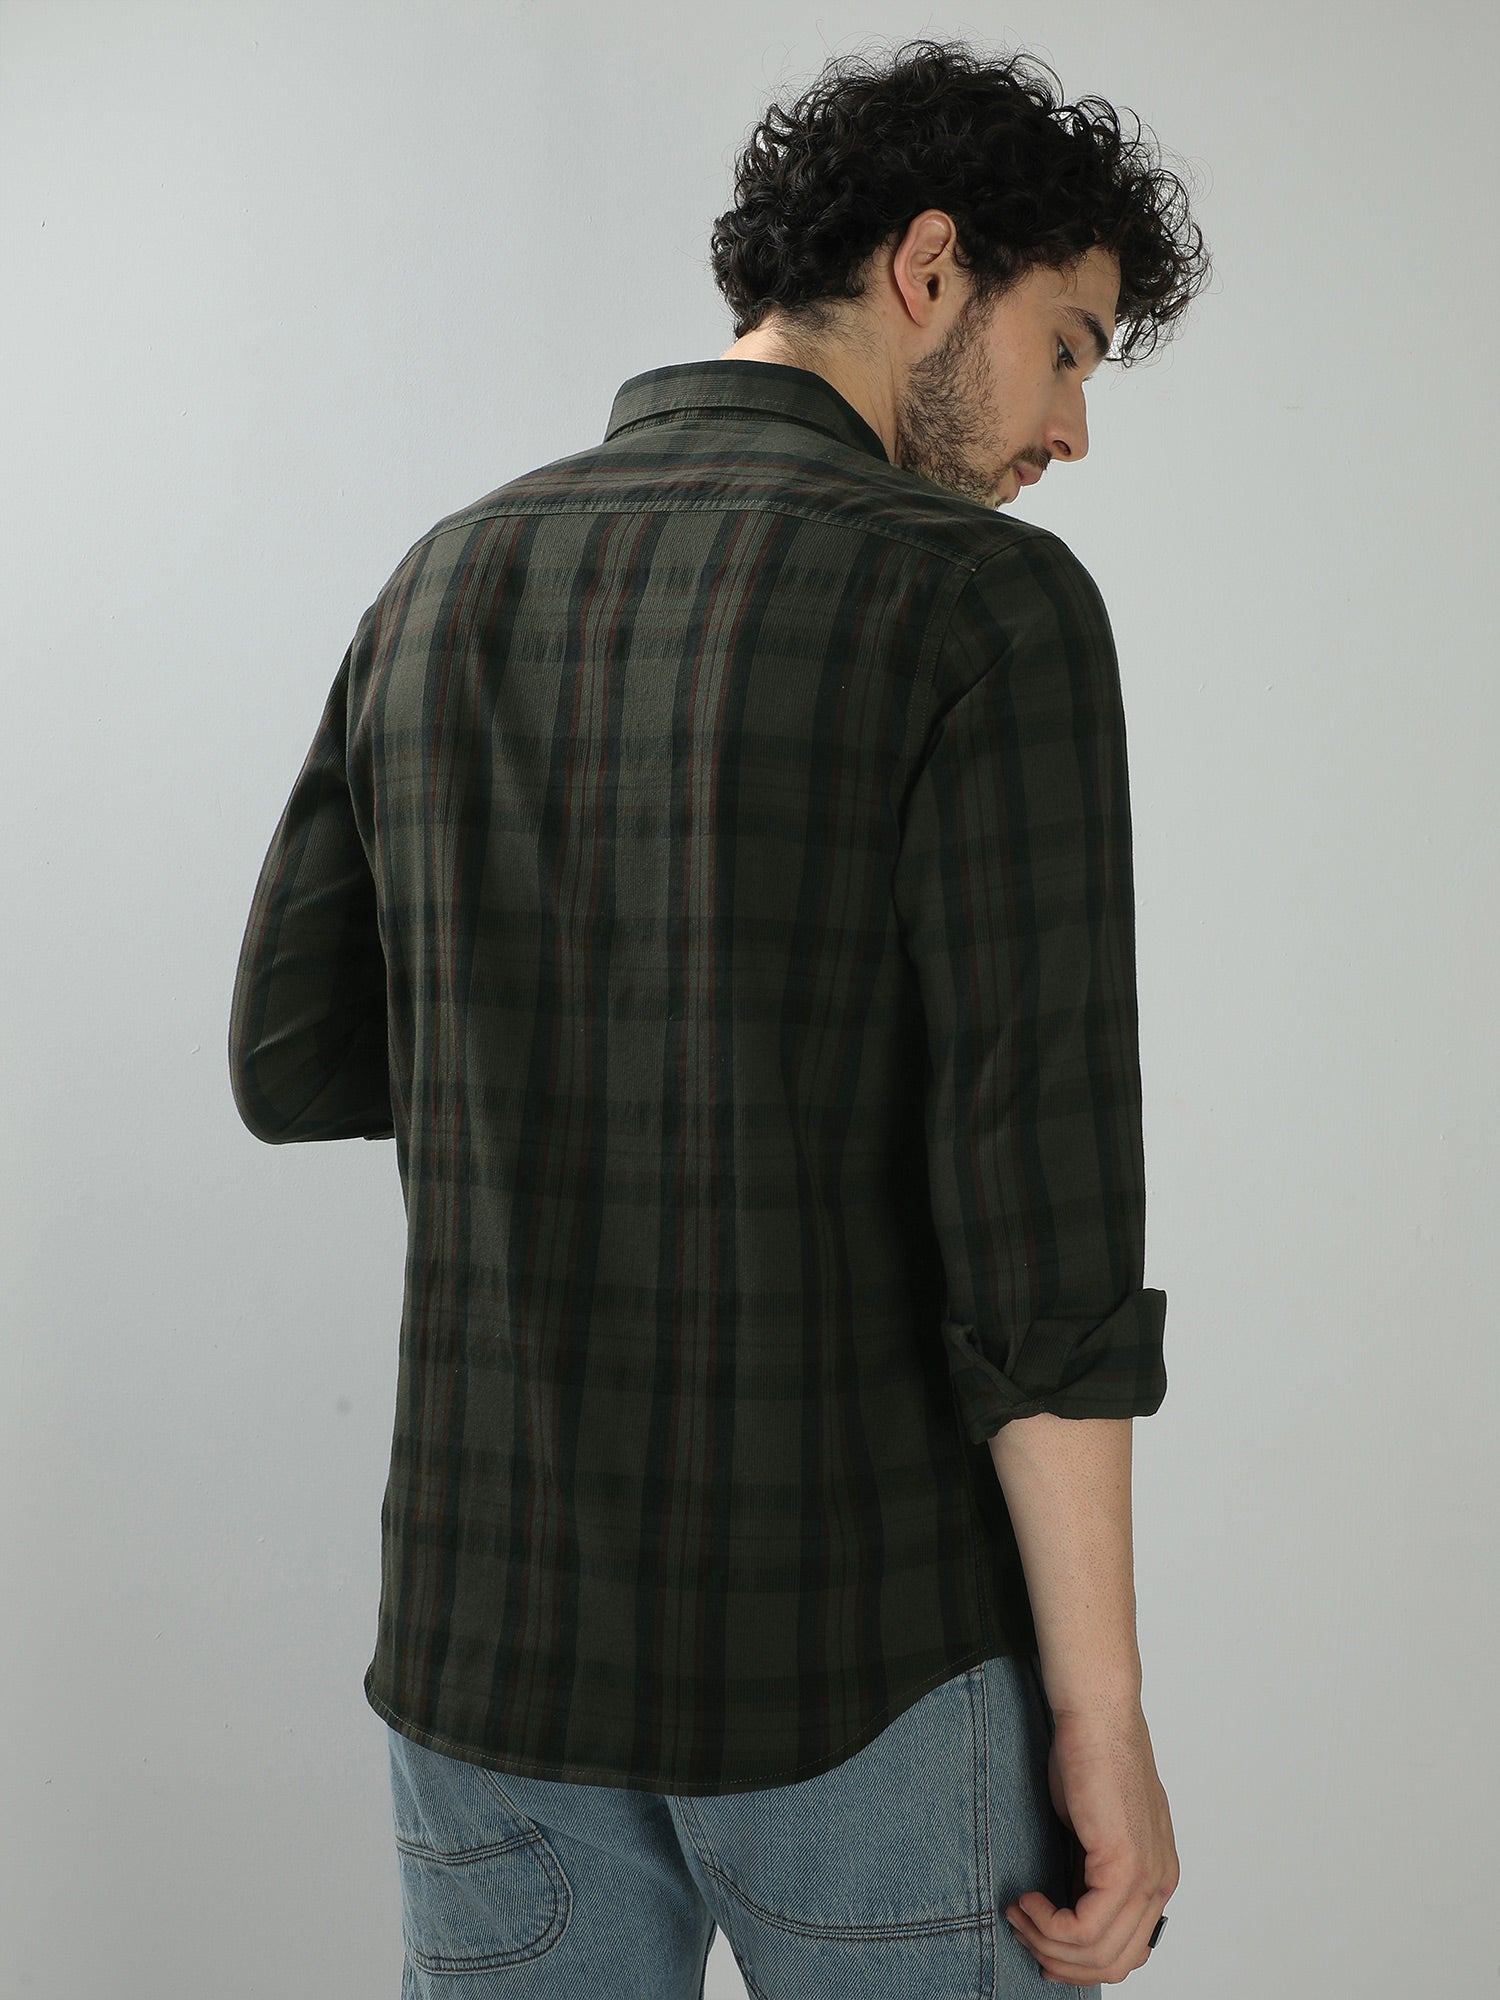 Buy Trendy Black And Grey Check Shirt Online In IndiaRs. 1449.00